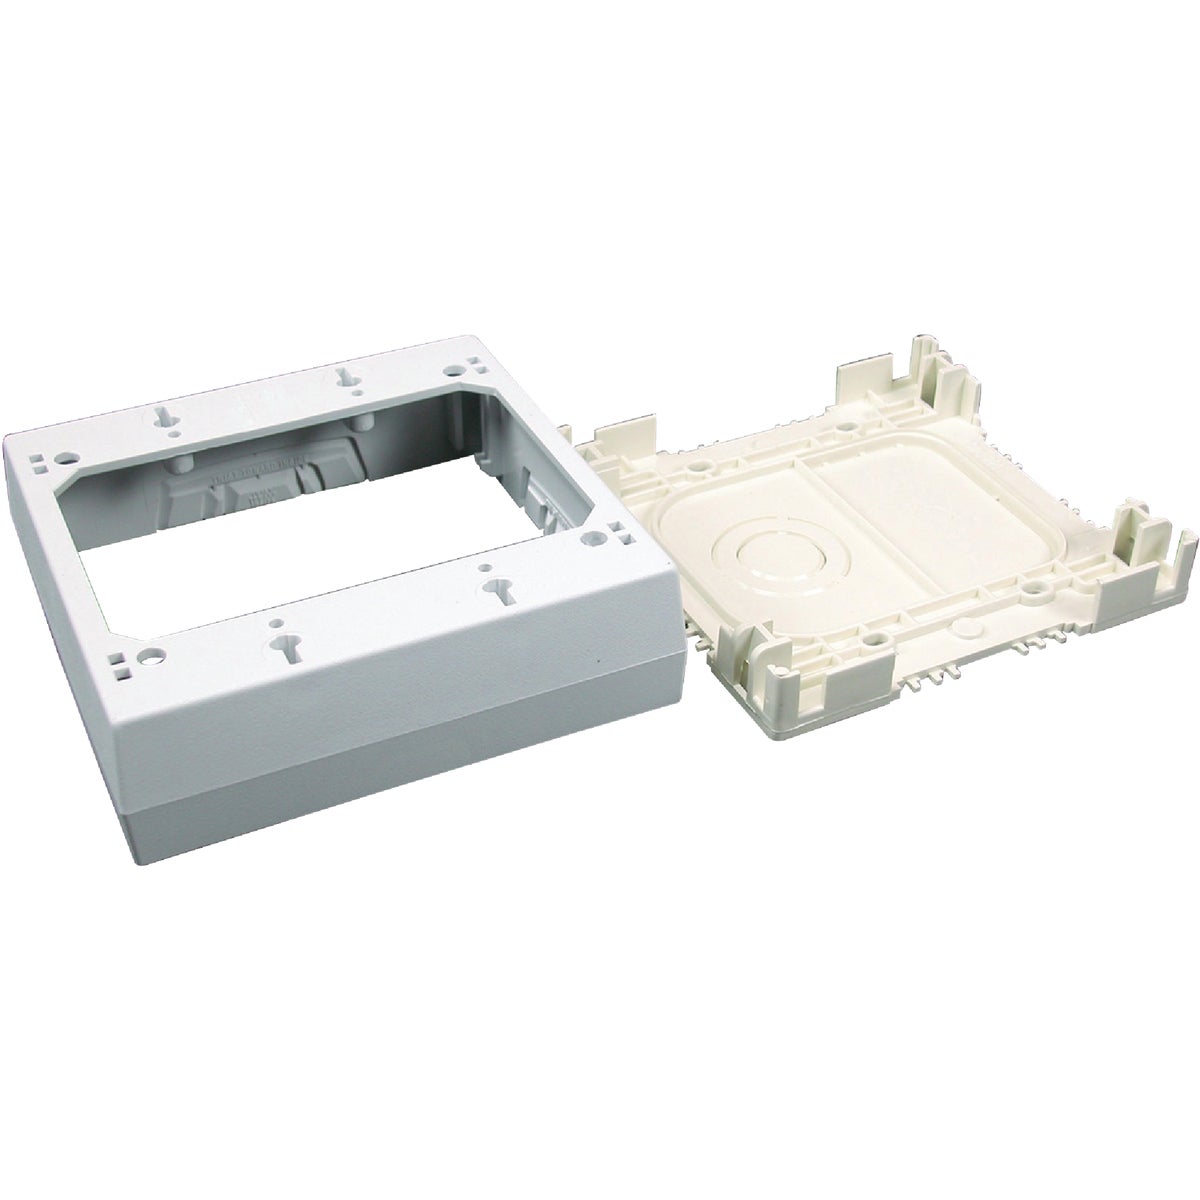 Item 554421, Standard double gang switch and receptacle box to install switches and 